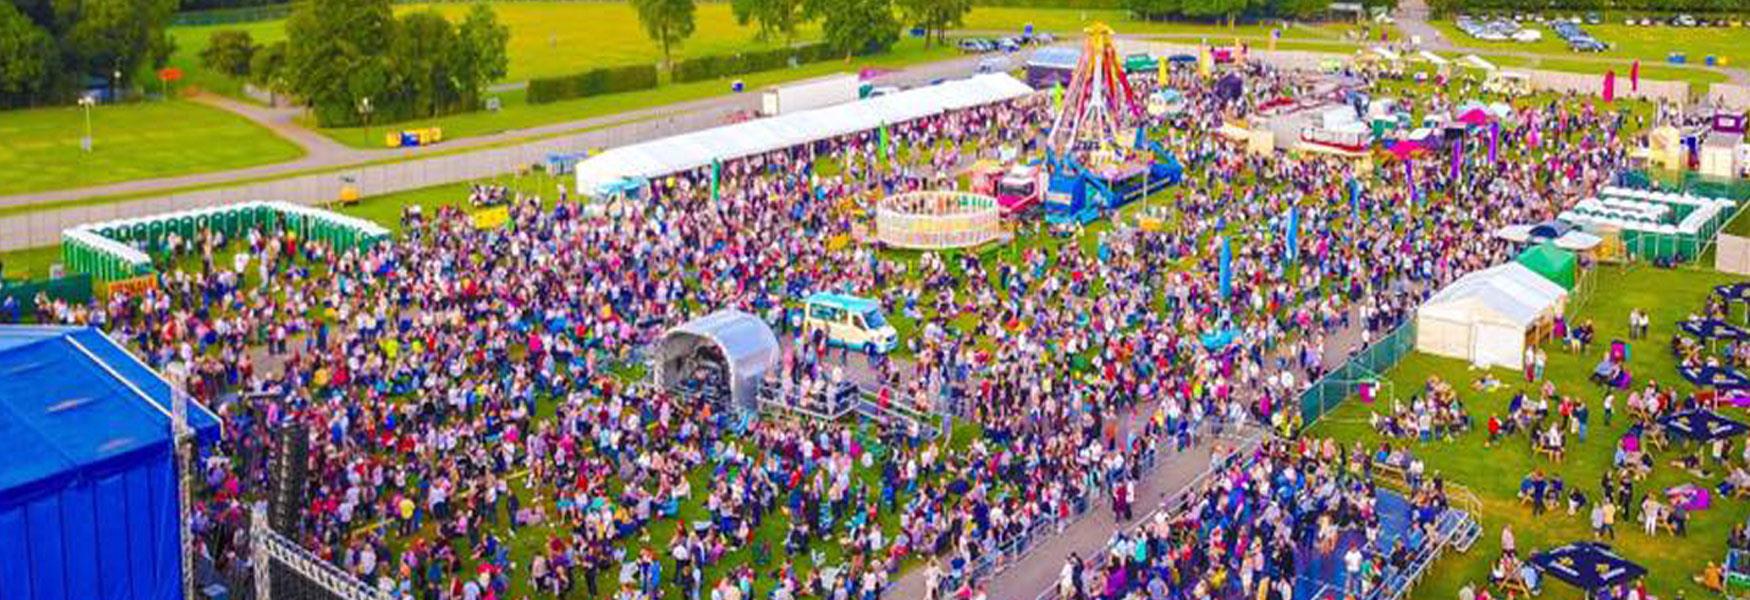 Large crowds at a festival at Kent Event Centre